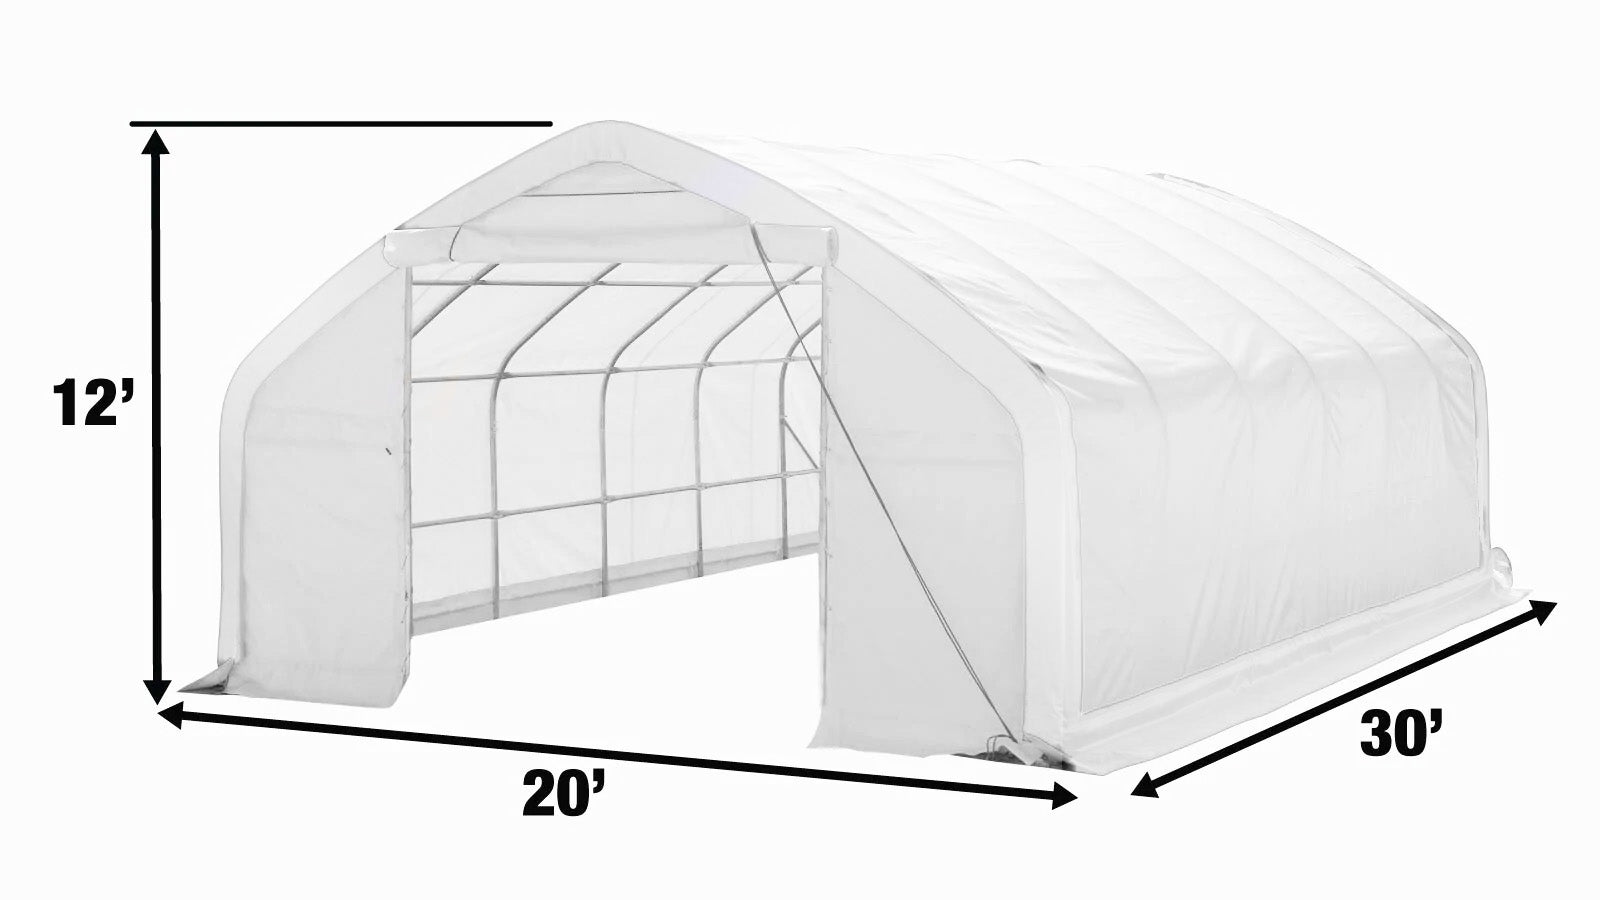 TMG Industrial 20' x 30' Straight Wall Peak Ceiling Storage Shelter with Heavy Duty 11 oz PE Cover & Drive Through Door, TMG-ST2031E-specifications-image